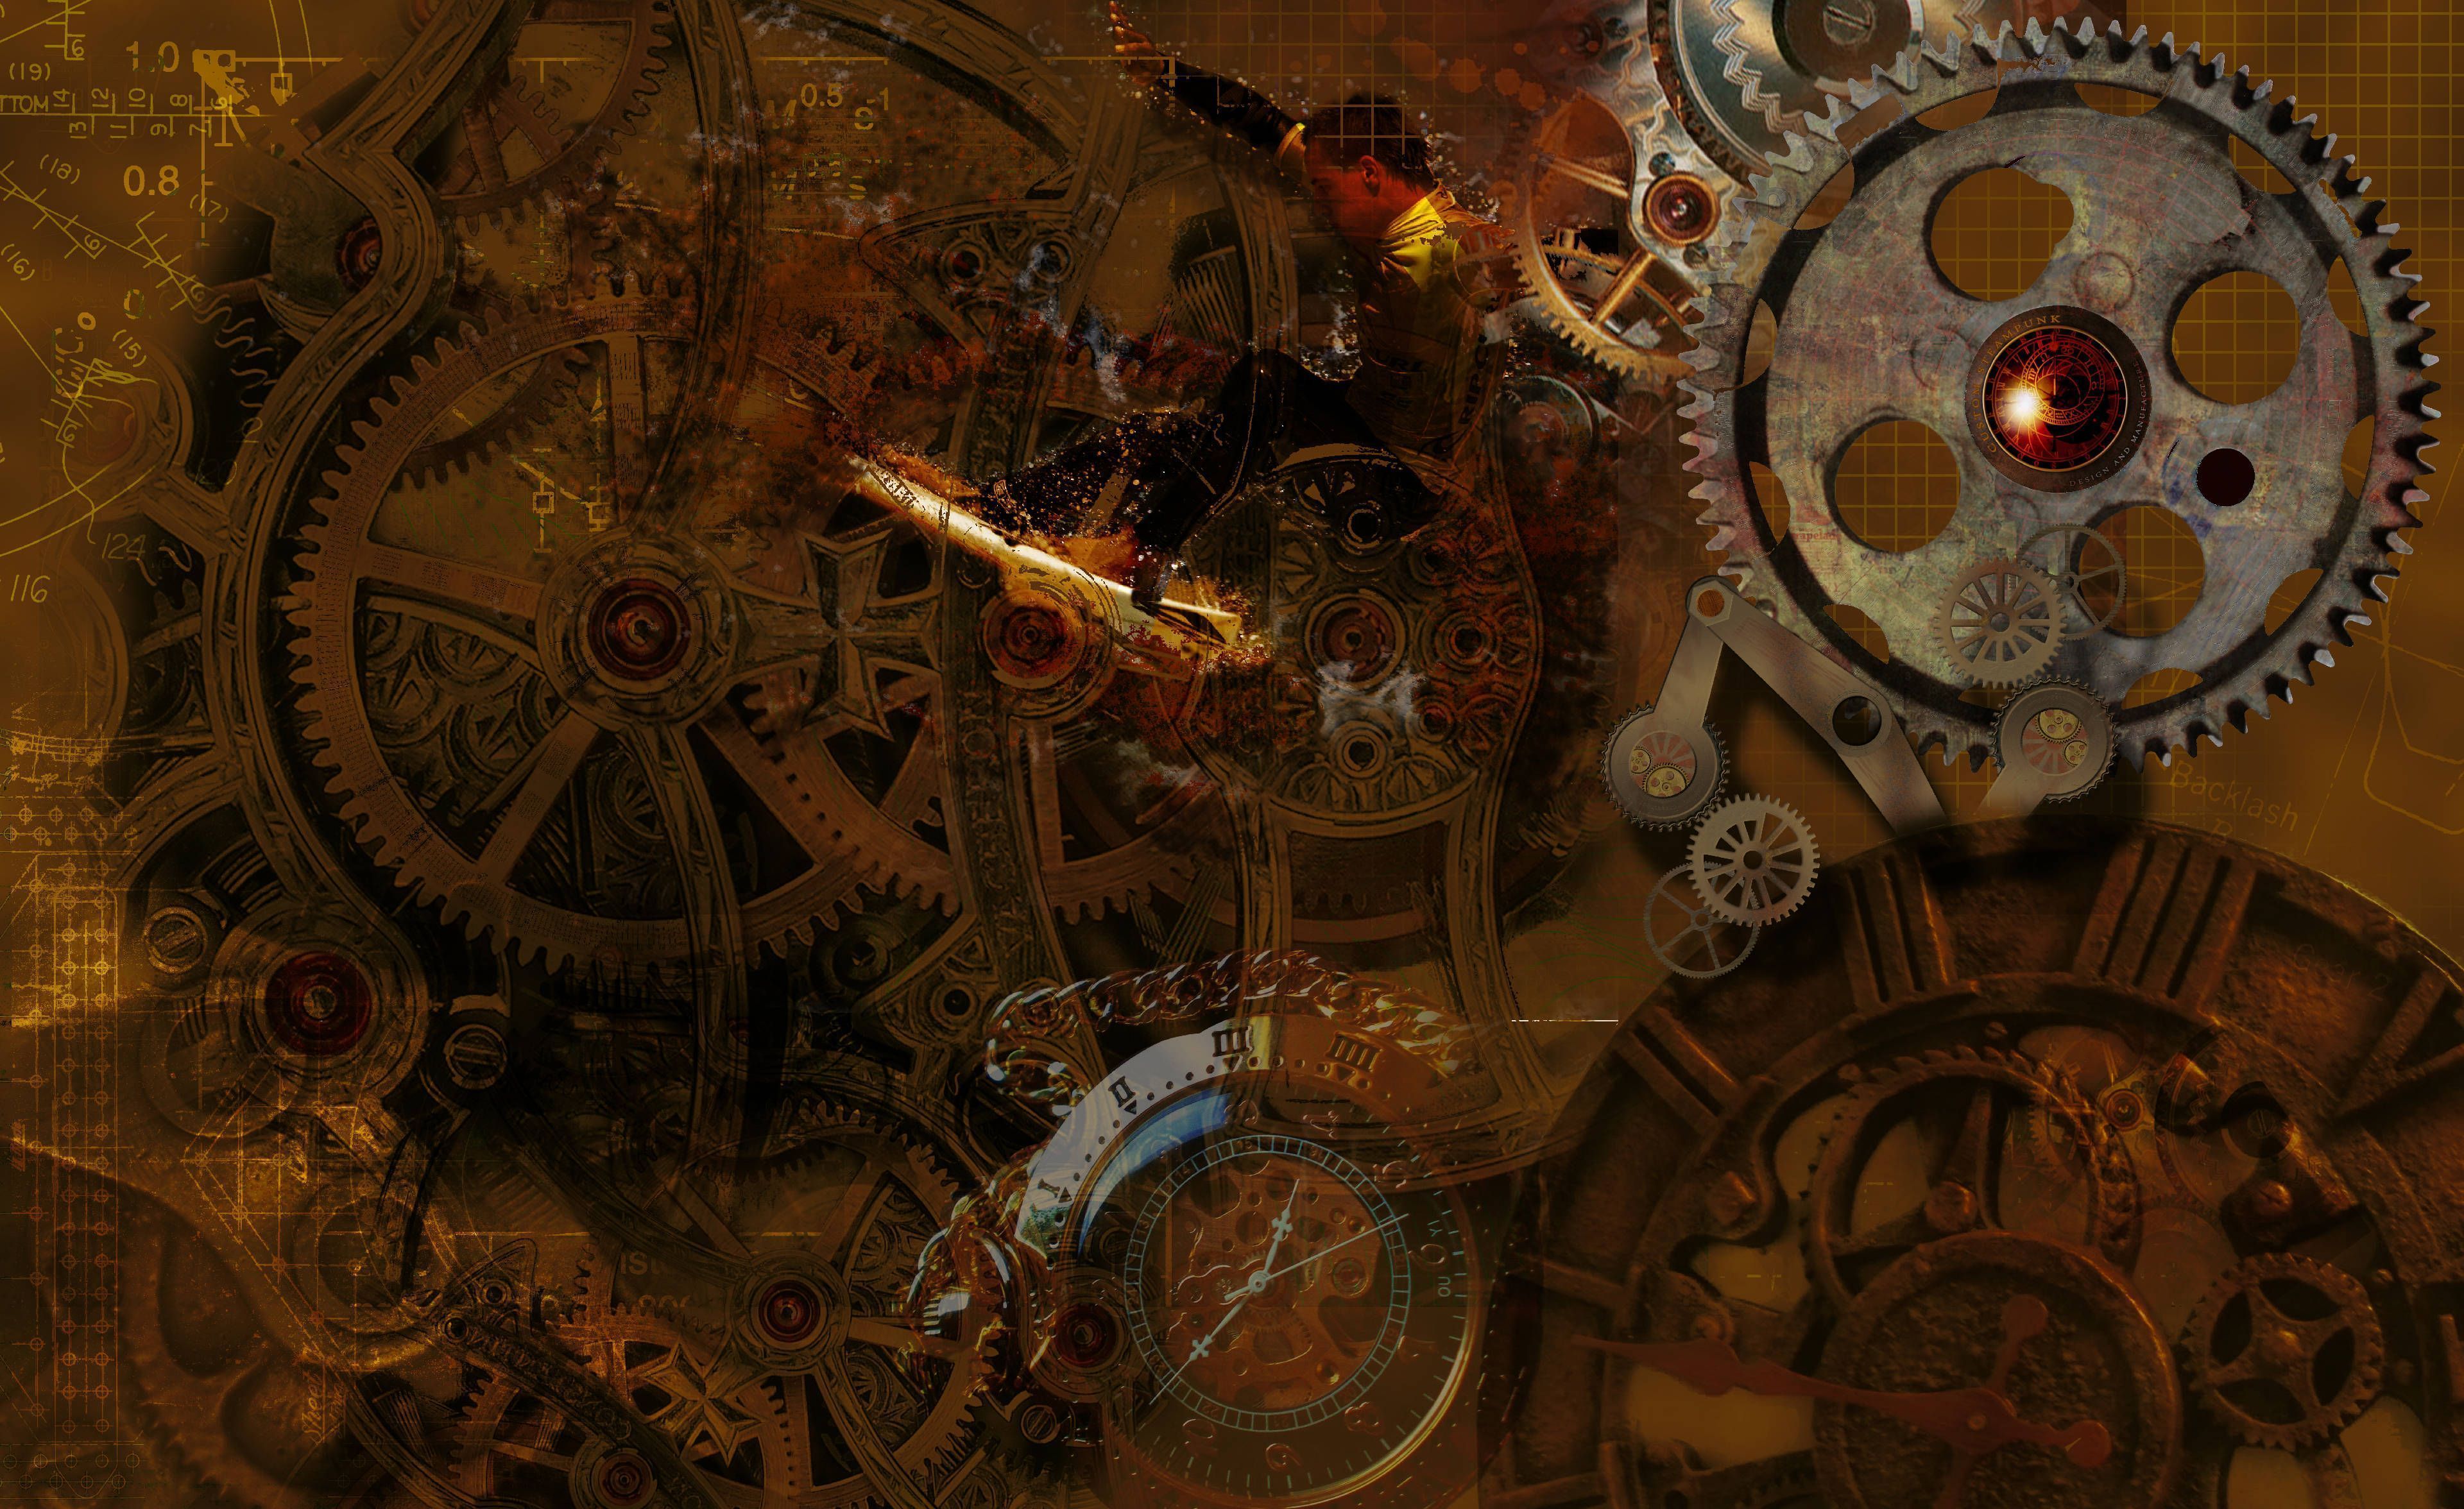 A collection of gears and clock parts. - Steampunk